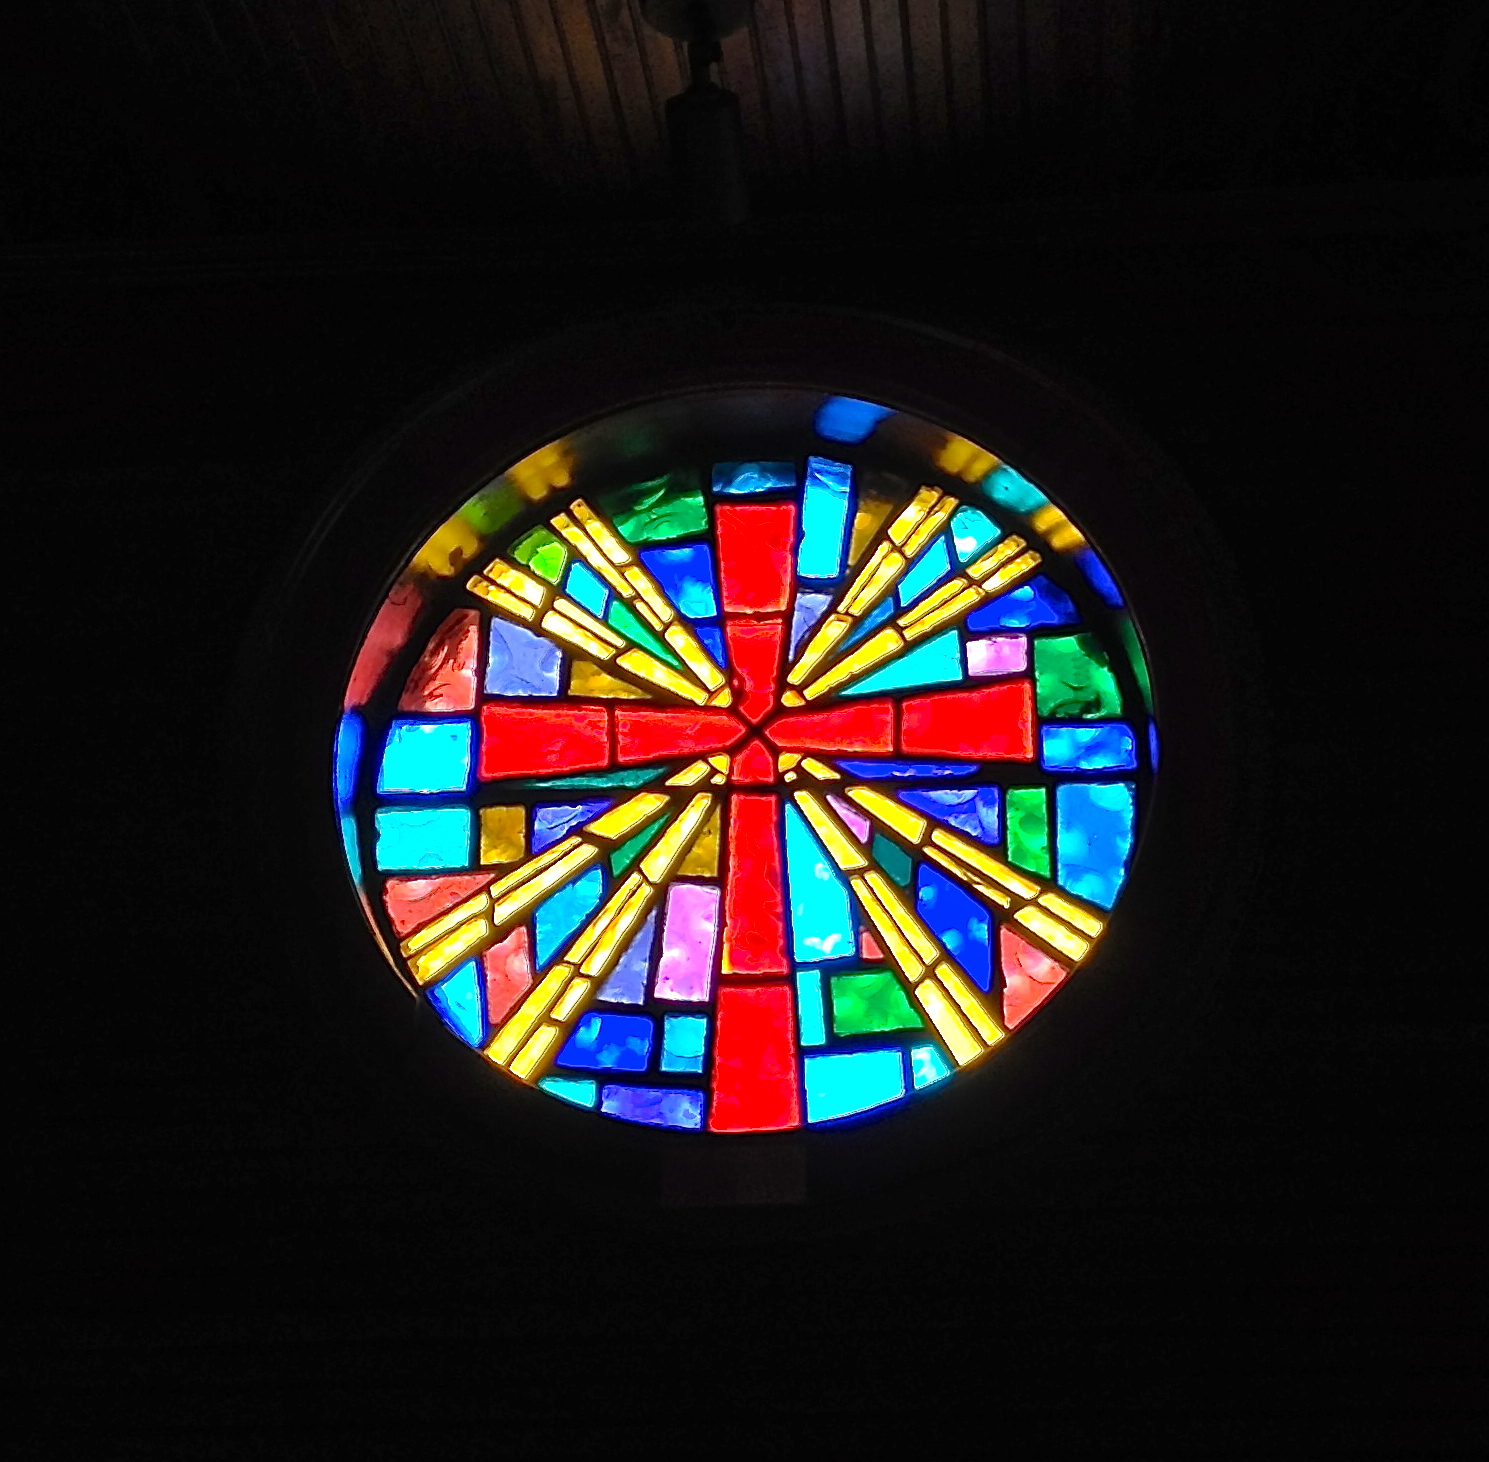 Some of the beautiful stained glass artwork in the sanctuary.